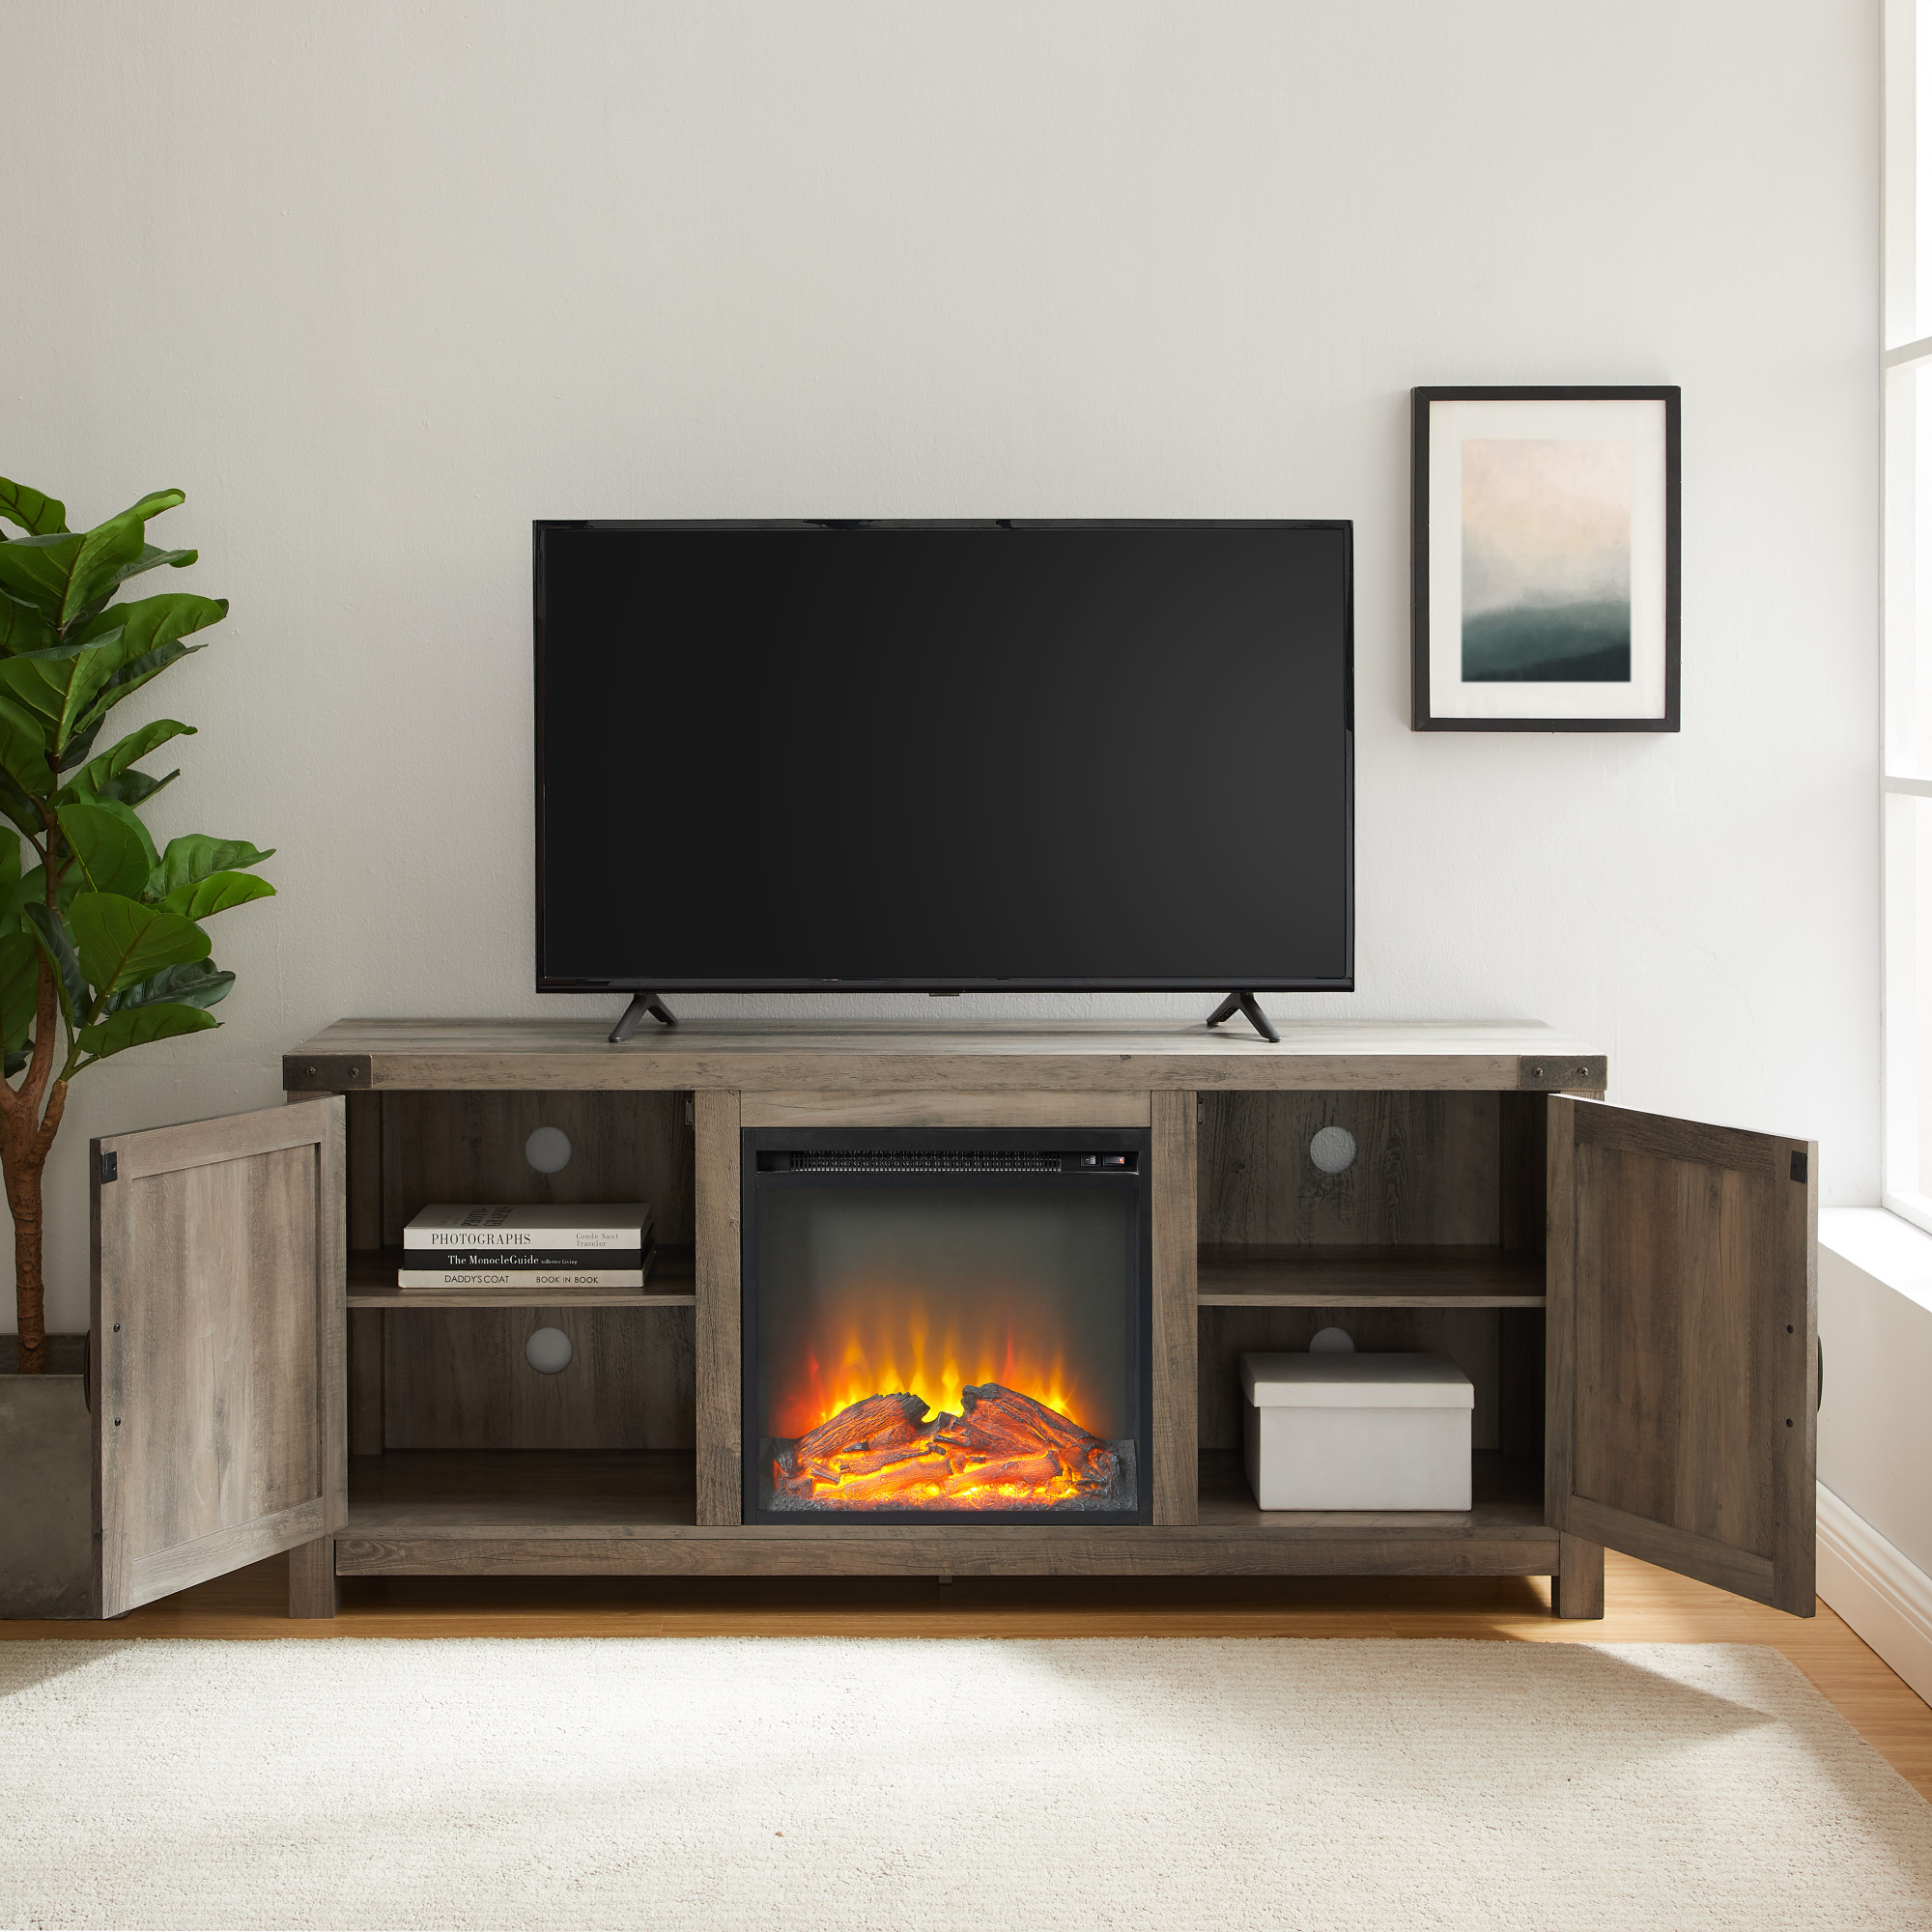 Walker Edison Modern Farmhouse Fireplace TV Stand for TVs up to 65", Grey Wash - image 4 of 11